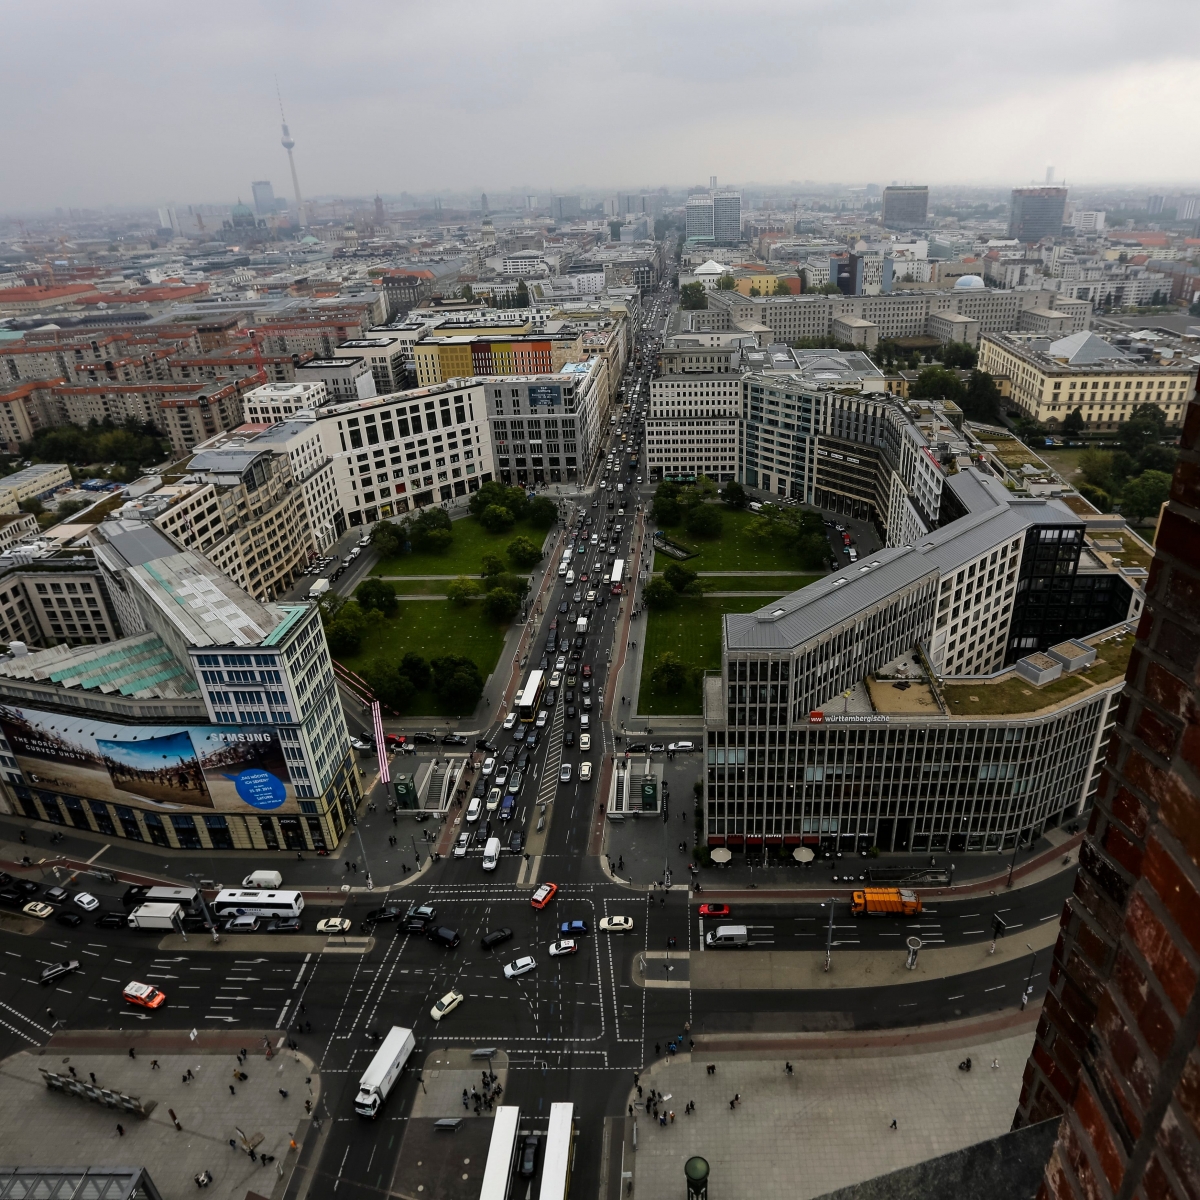 The Sept. 25, 2014 photo shows a view of the Potsdamer Platz and the surrounding areas  in Berlin. (AP Photo/Markus Schreiber) Germany Berlin Wall Anniversary Then and Now